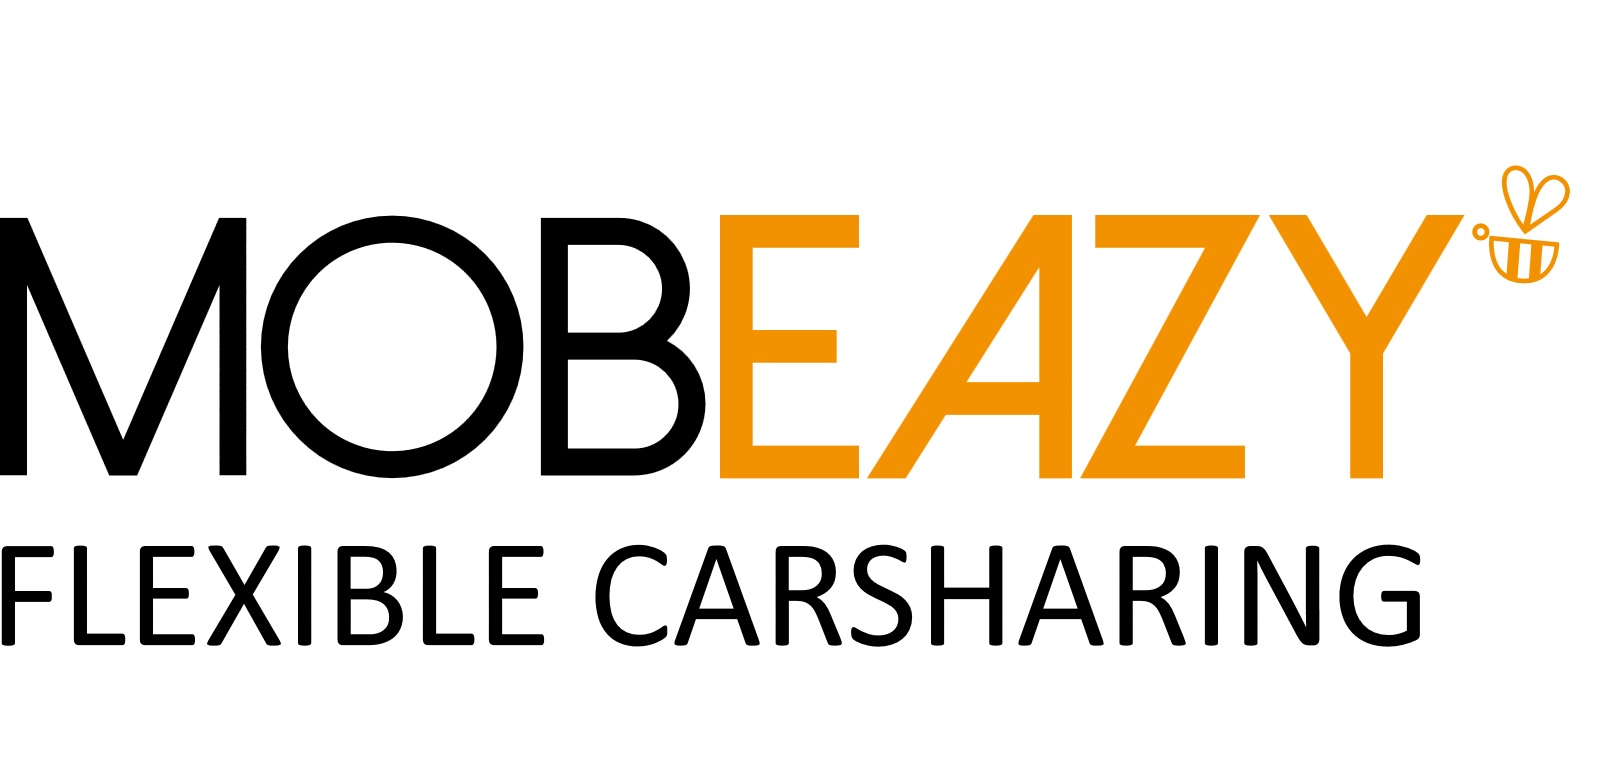 Mobeazy flexible carsharing - Eco Green Auto Clean